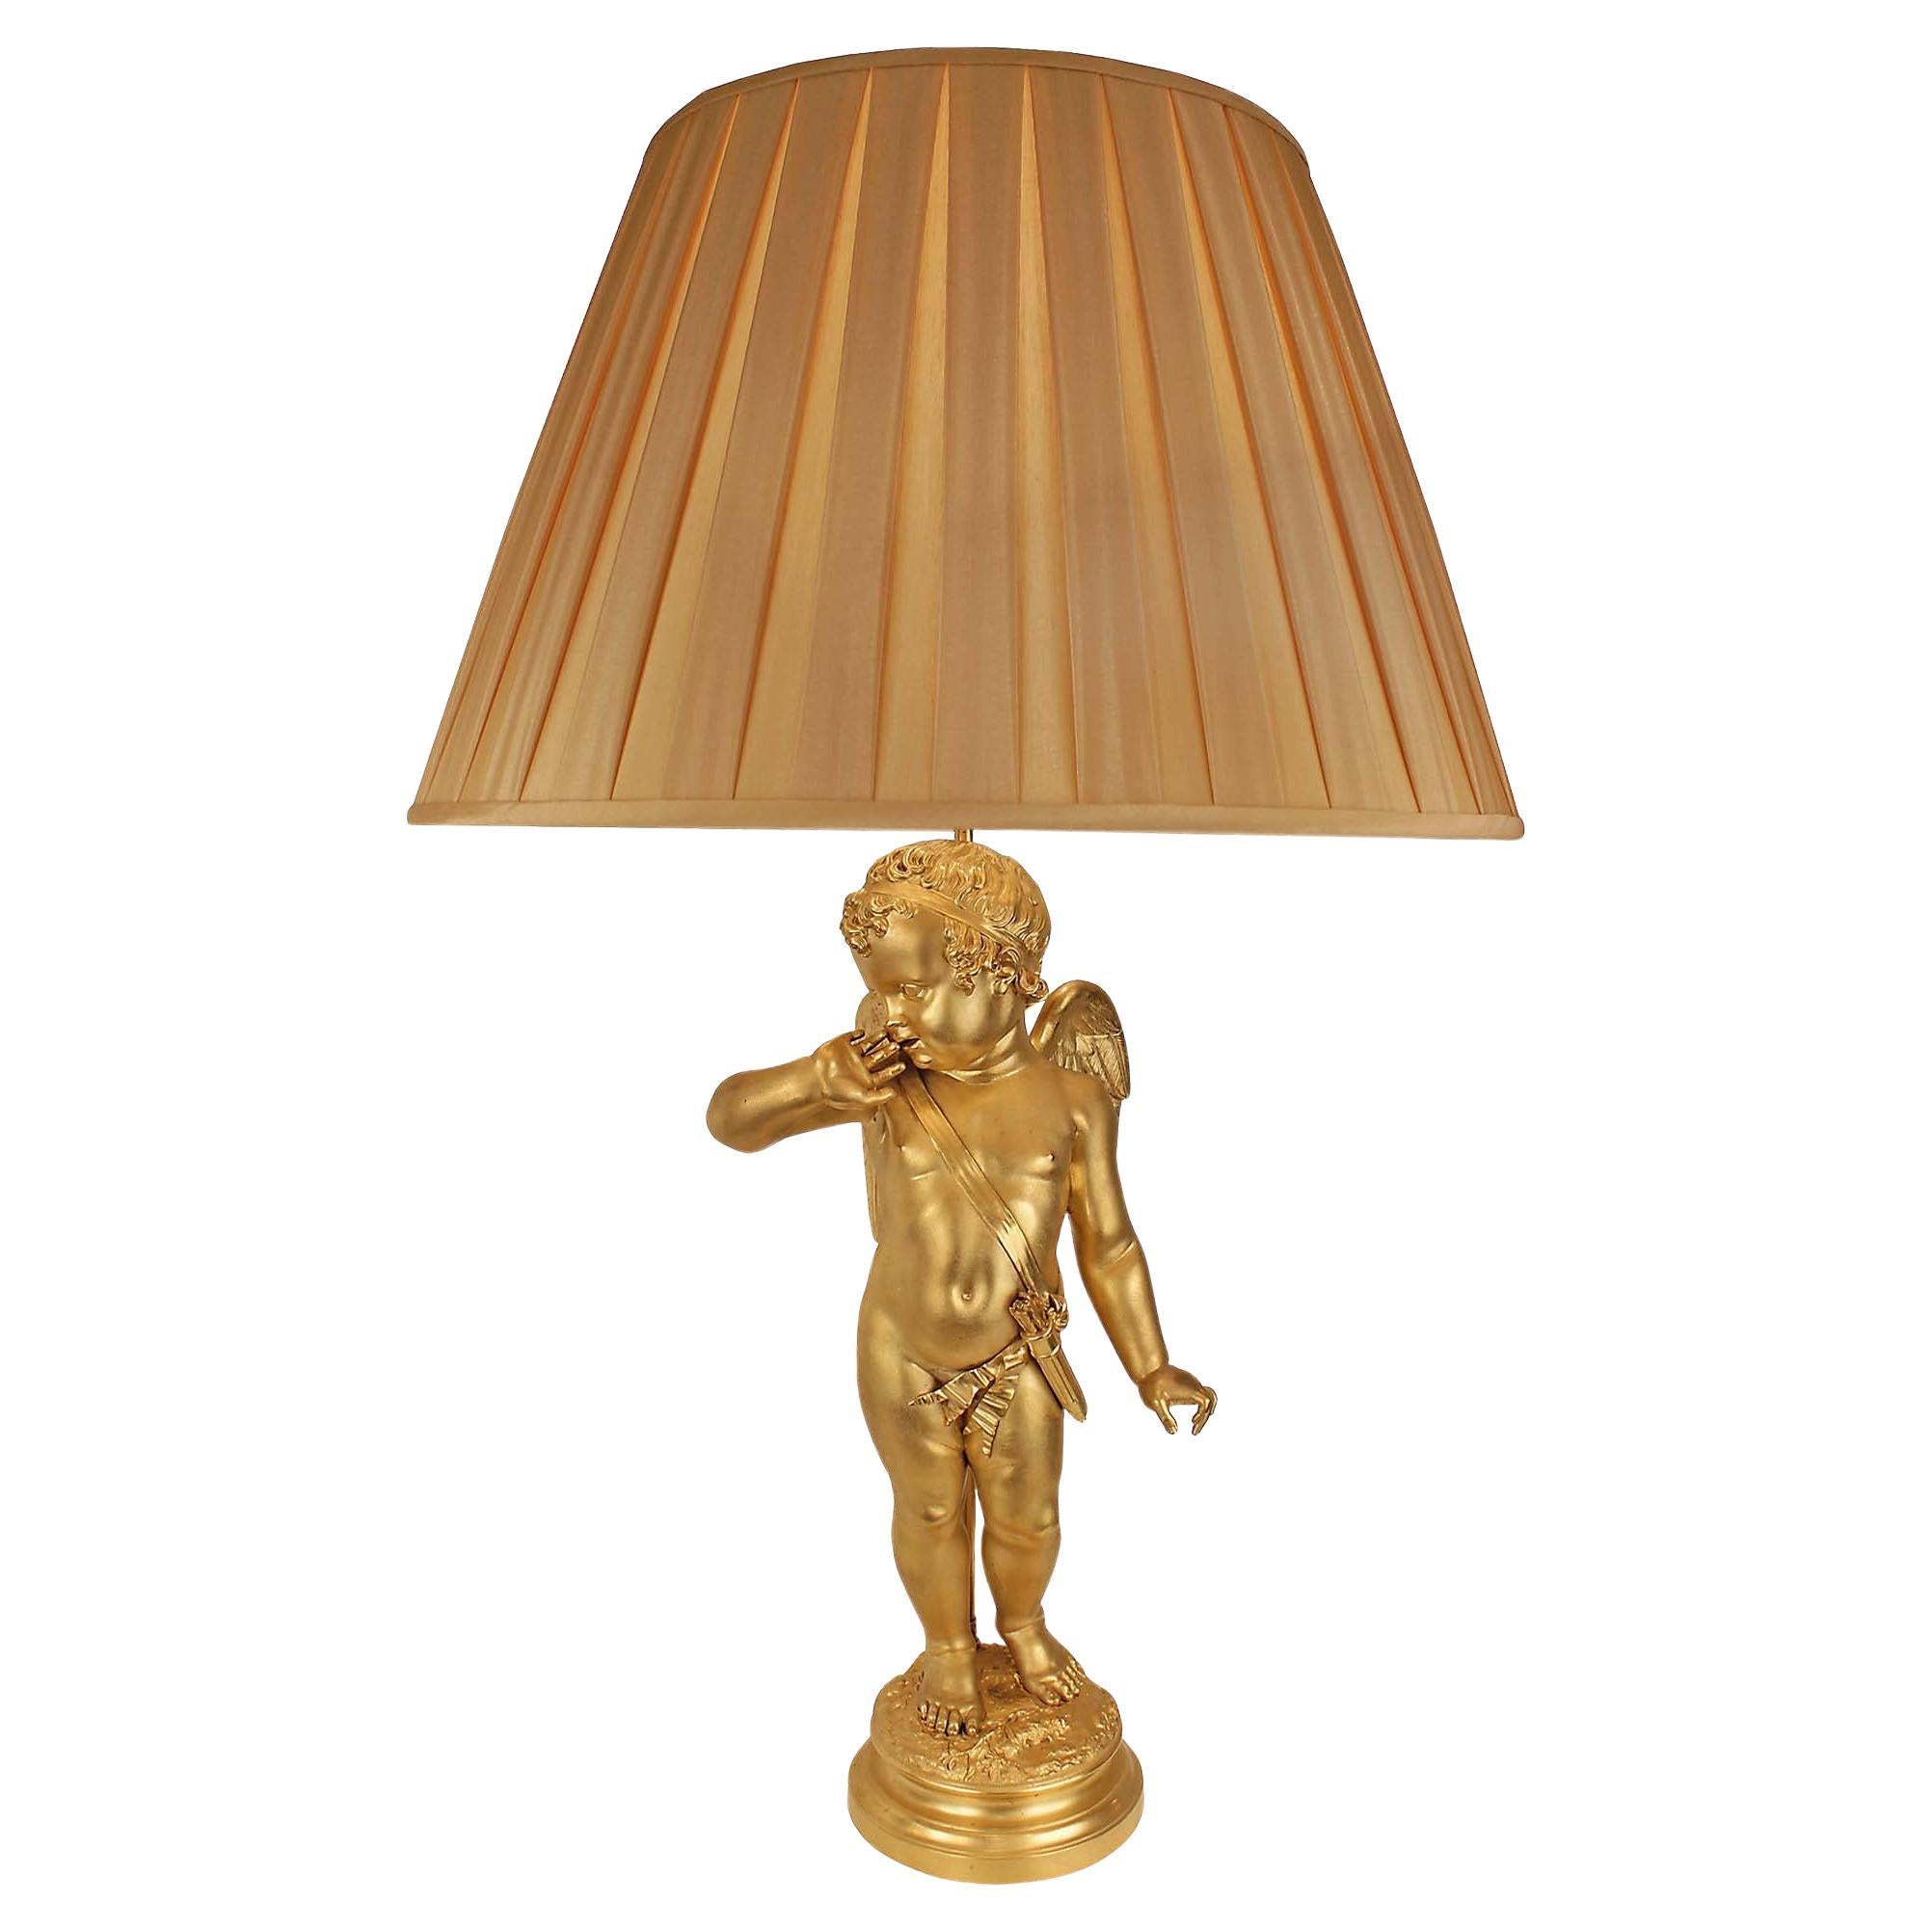 French 19th Century Ormolu Cherub Lamp, After A Sculpture By Pigalle For Sale